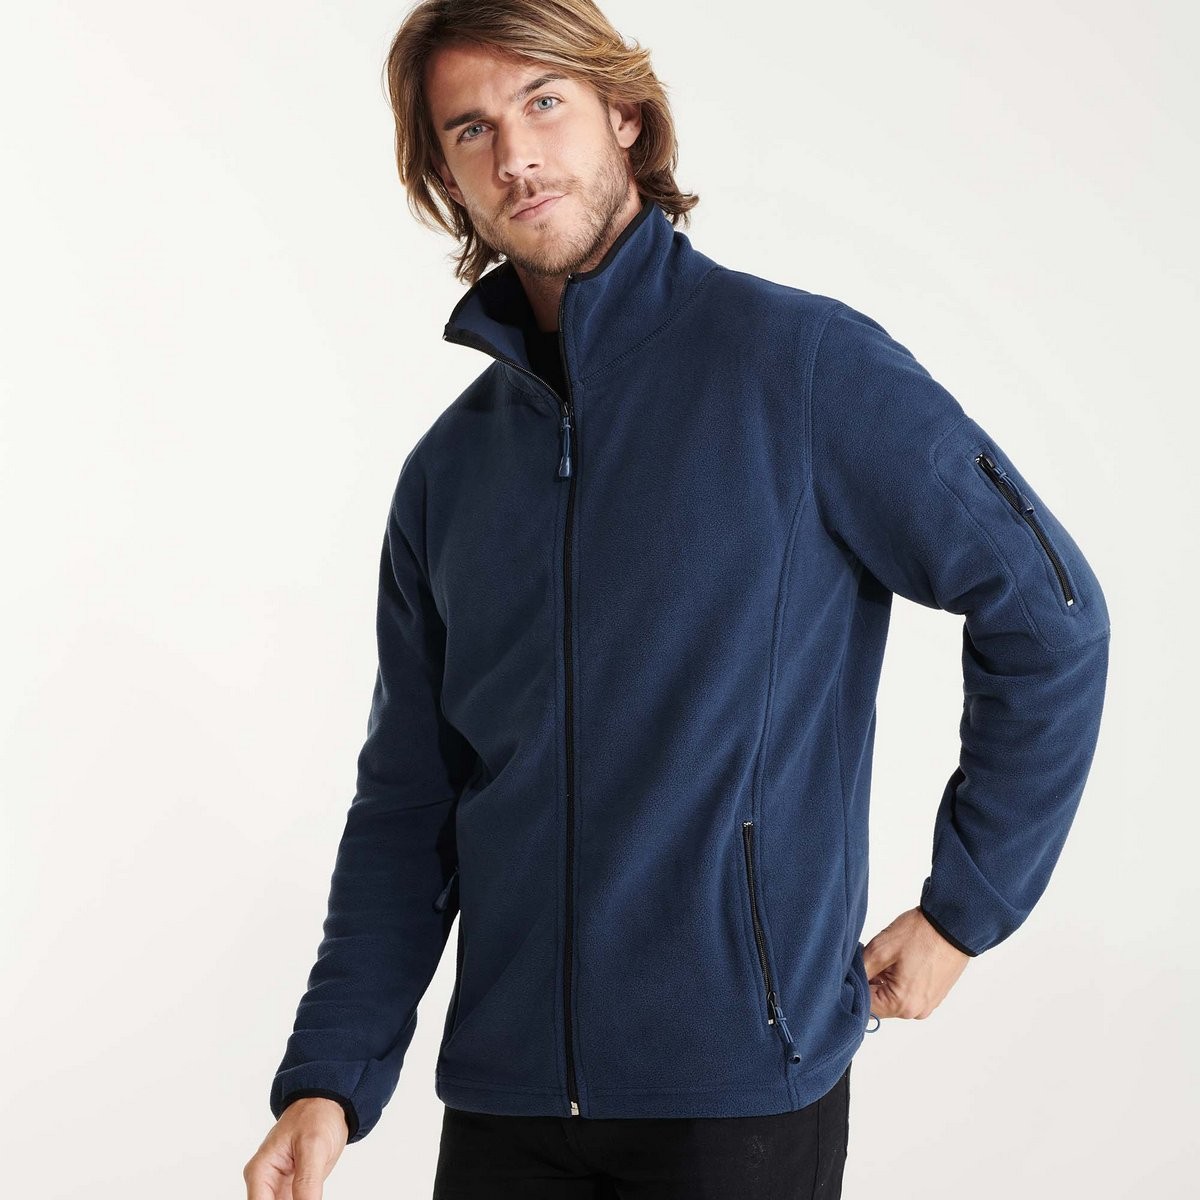 Roly Luciane 1195 Hombre – Ropa Andorra